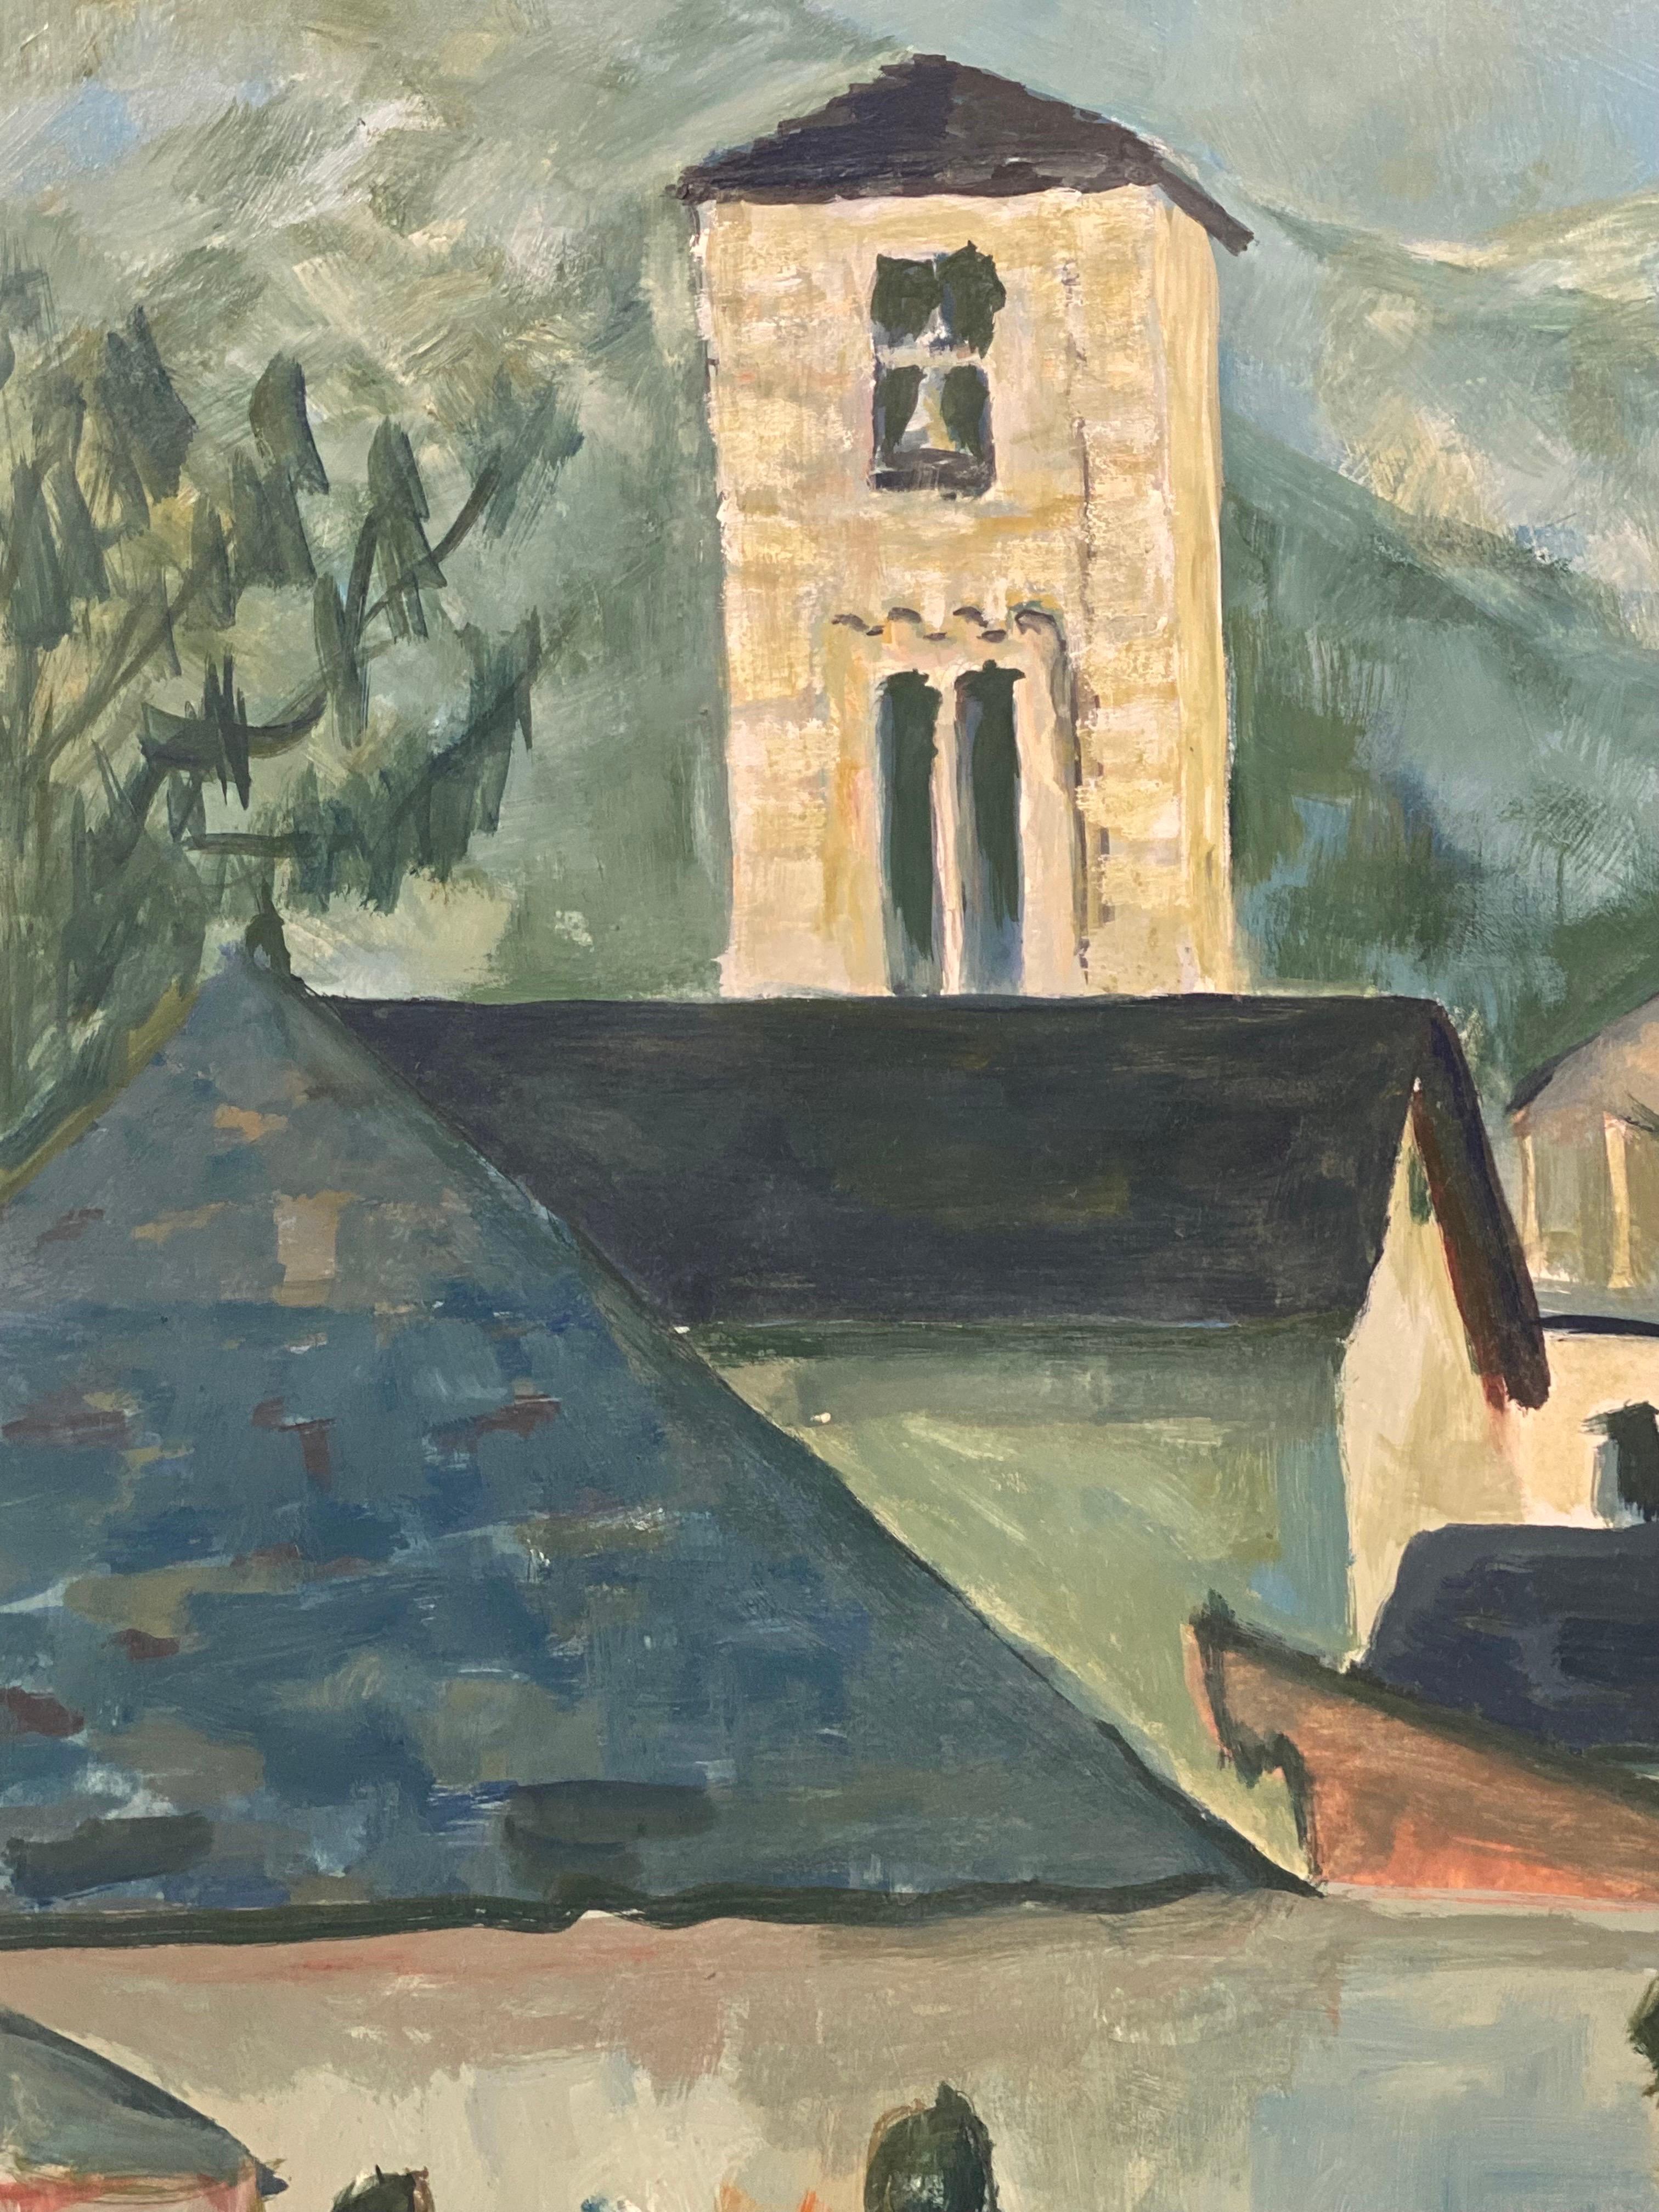 Blue Landscape
by Bernard Labbe (French mid 20th century), stamped verso
original oil painting on paper 
overall size: 22 x 14.5 inches
condition: very good and ready to be enjoyed. 

provenance: the artists atelier/ studio, France (stamped verso)